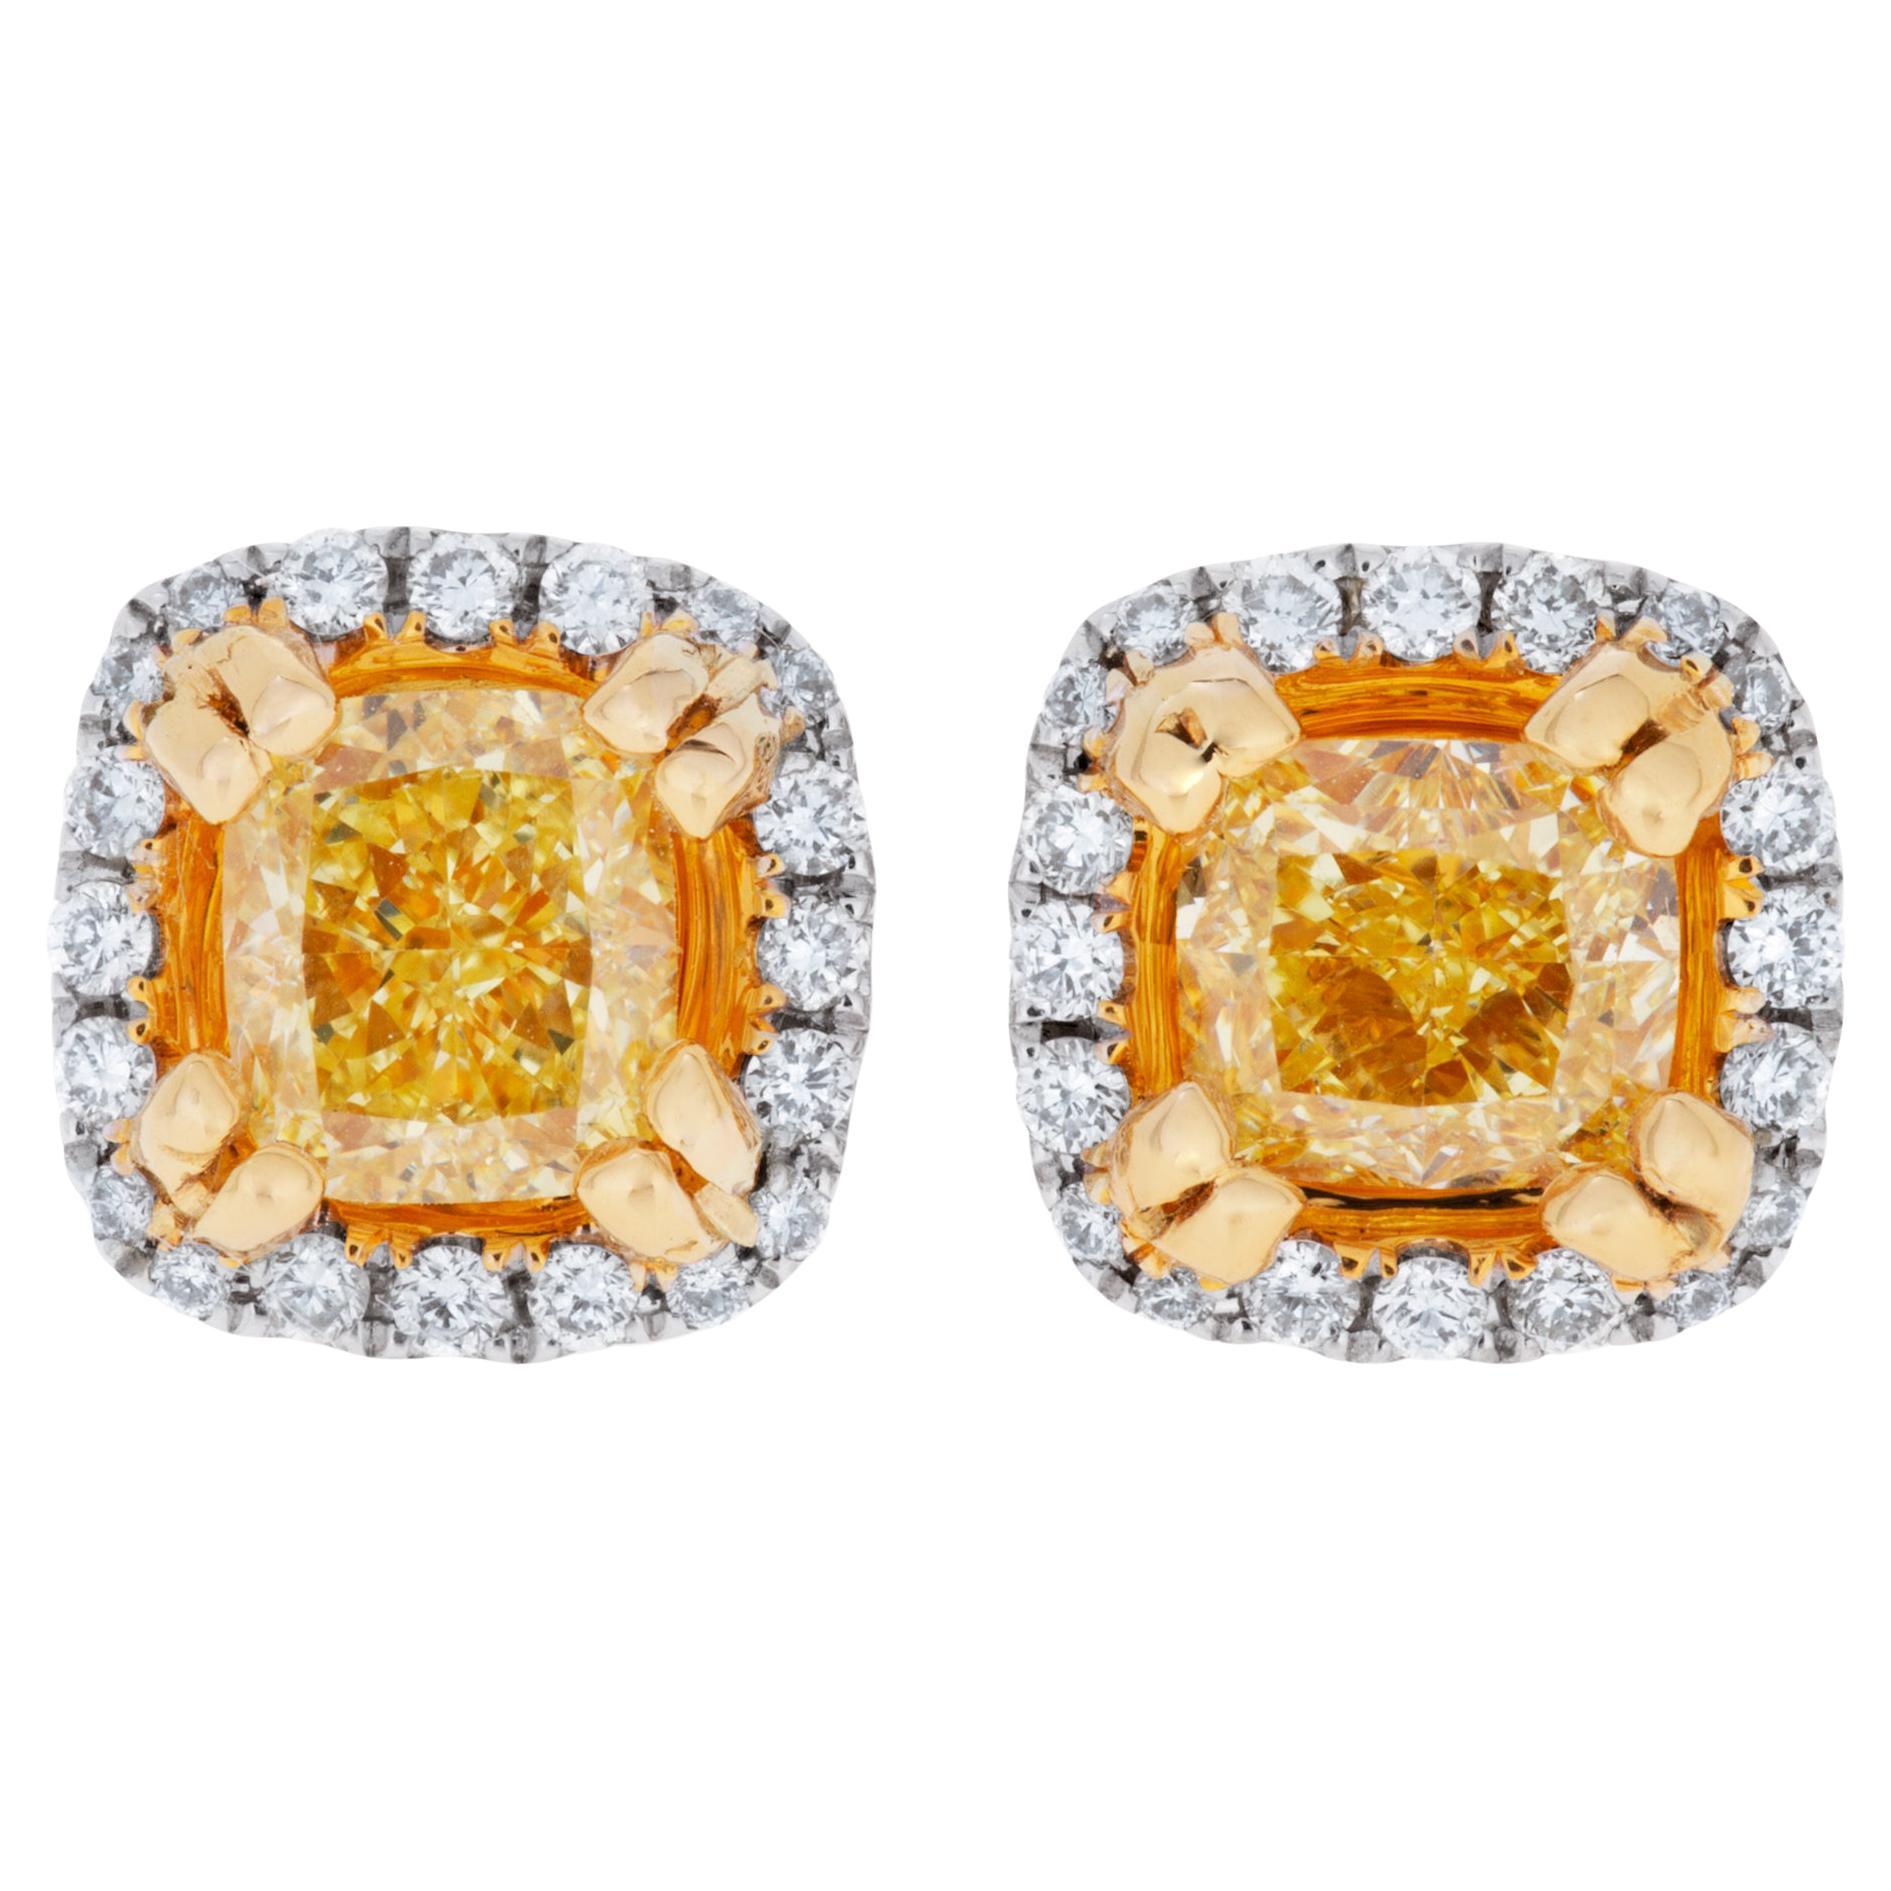 Yellow Diamond Stud Earrings in 18k White and Yellow Gold